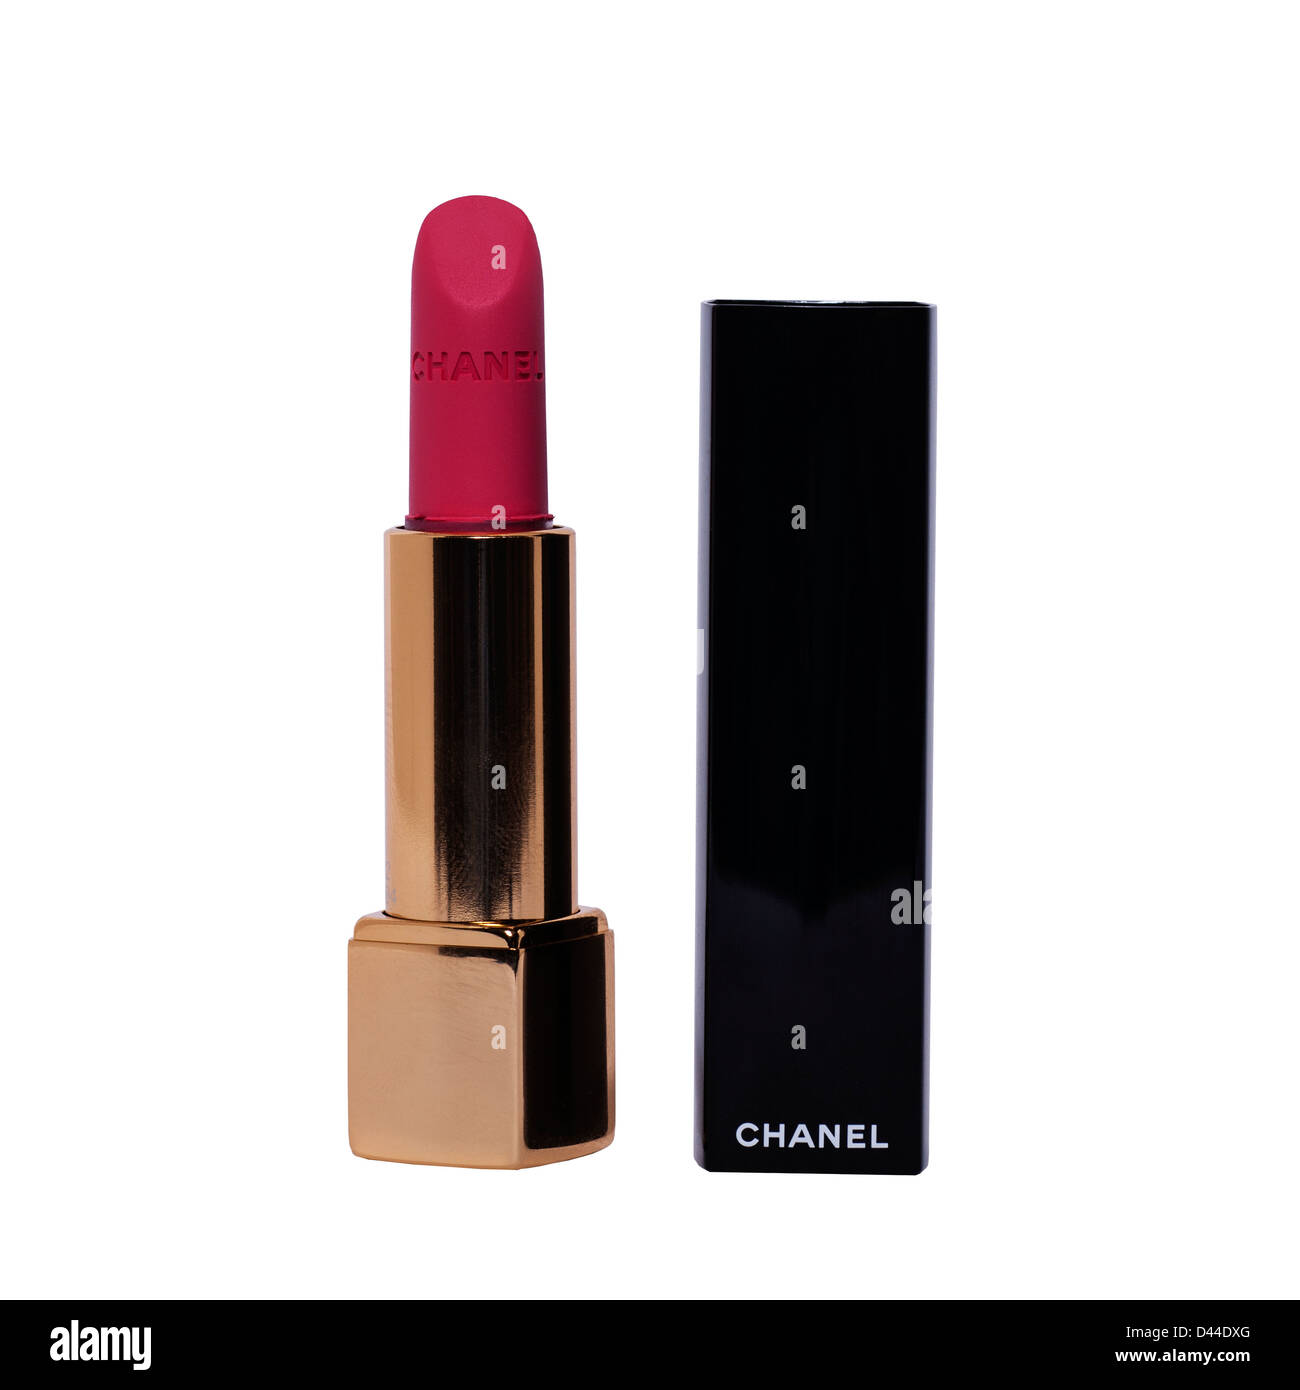 A Chanel lipstick on a white background Stock Photo